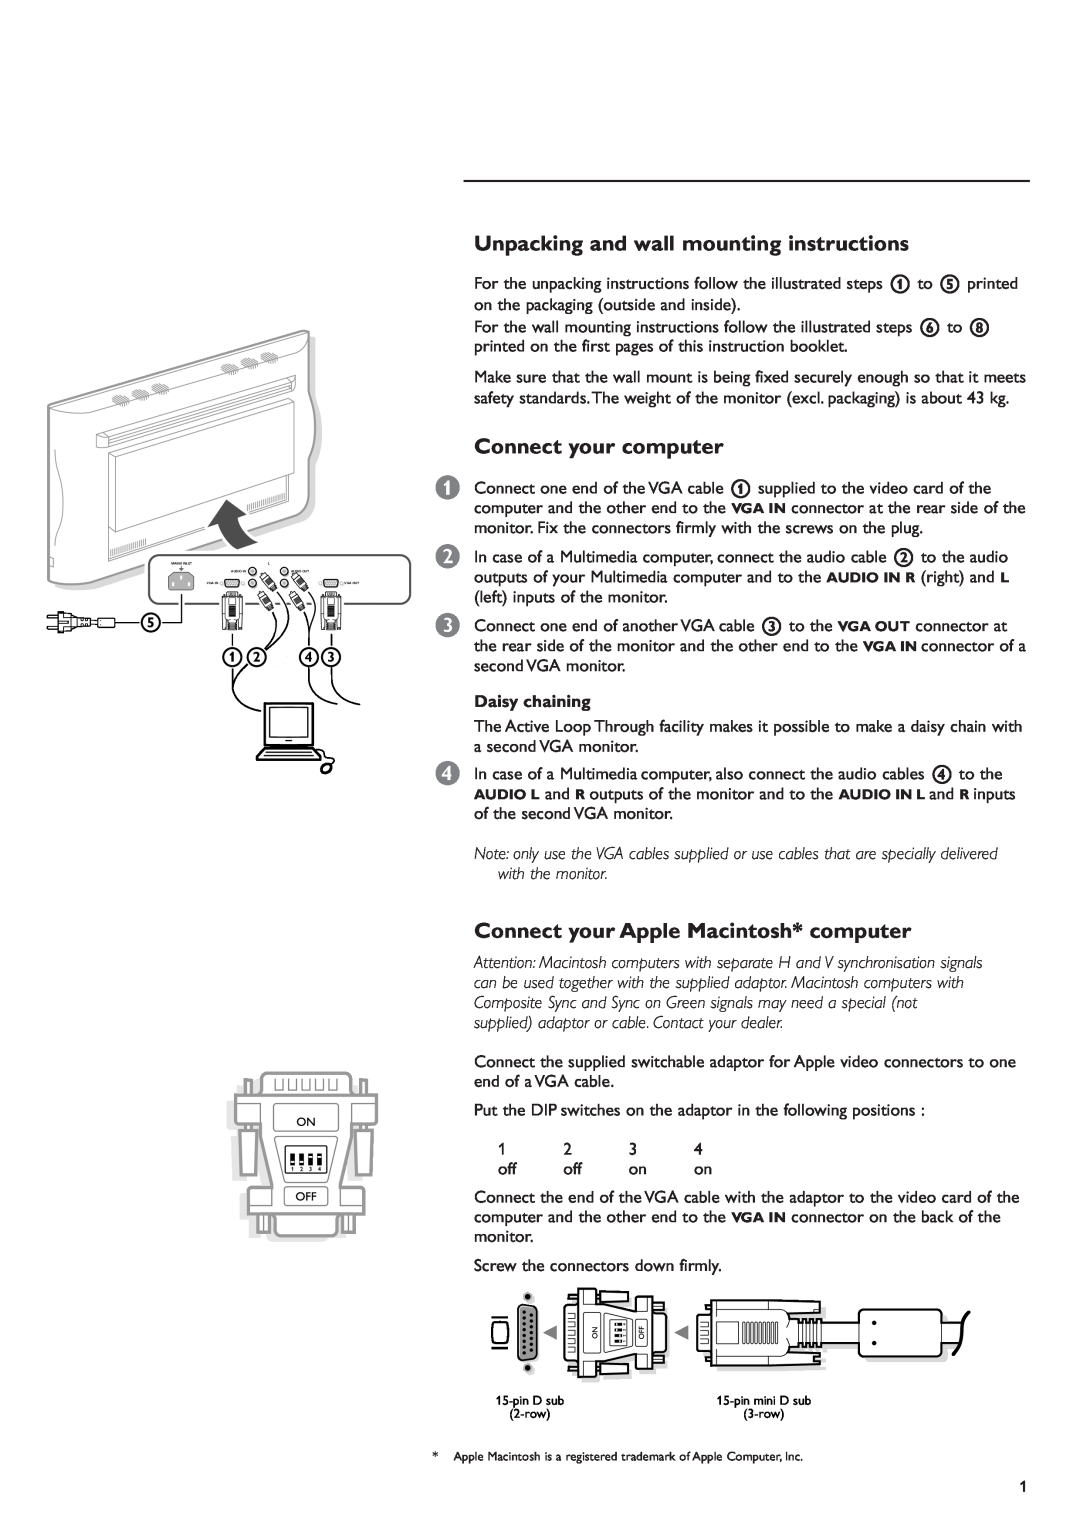 Apple Computer Monitor manual Unpacking and wall mounting instructions, Connect your computer 